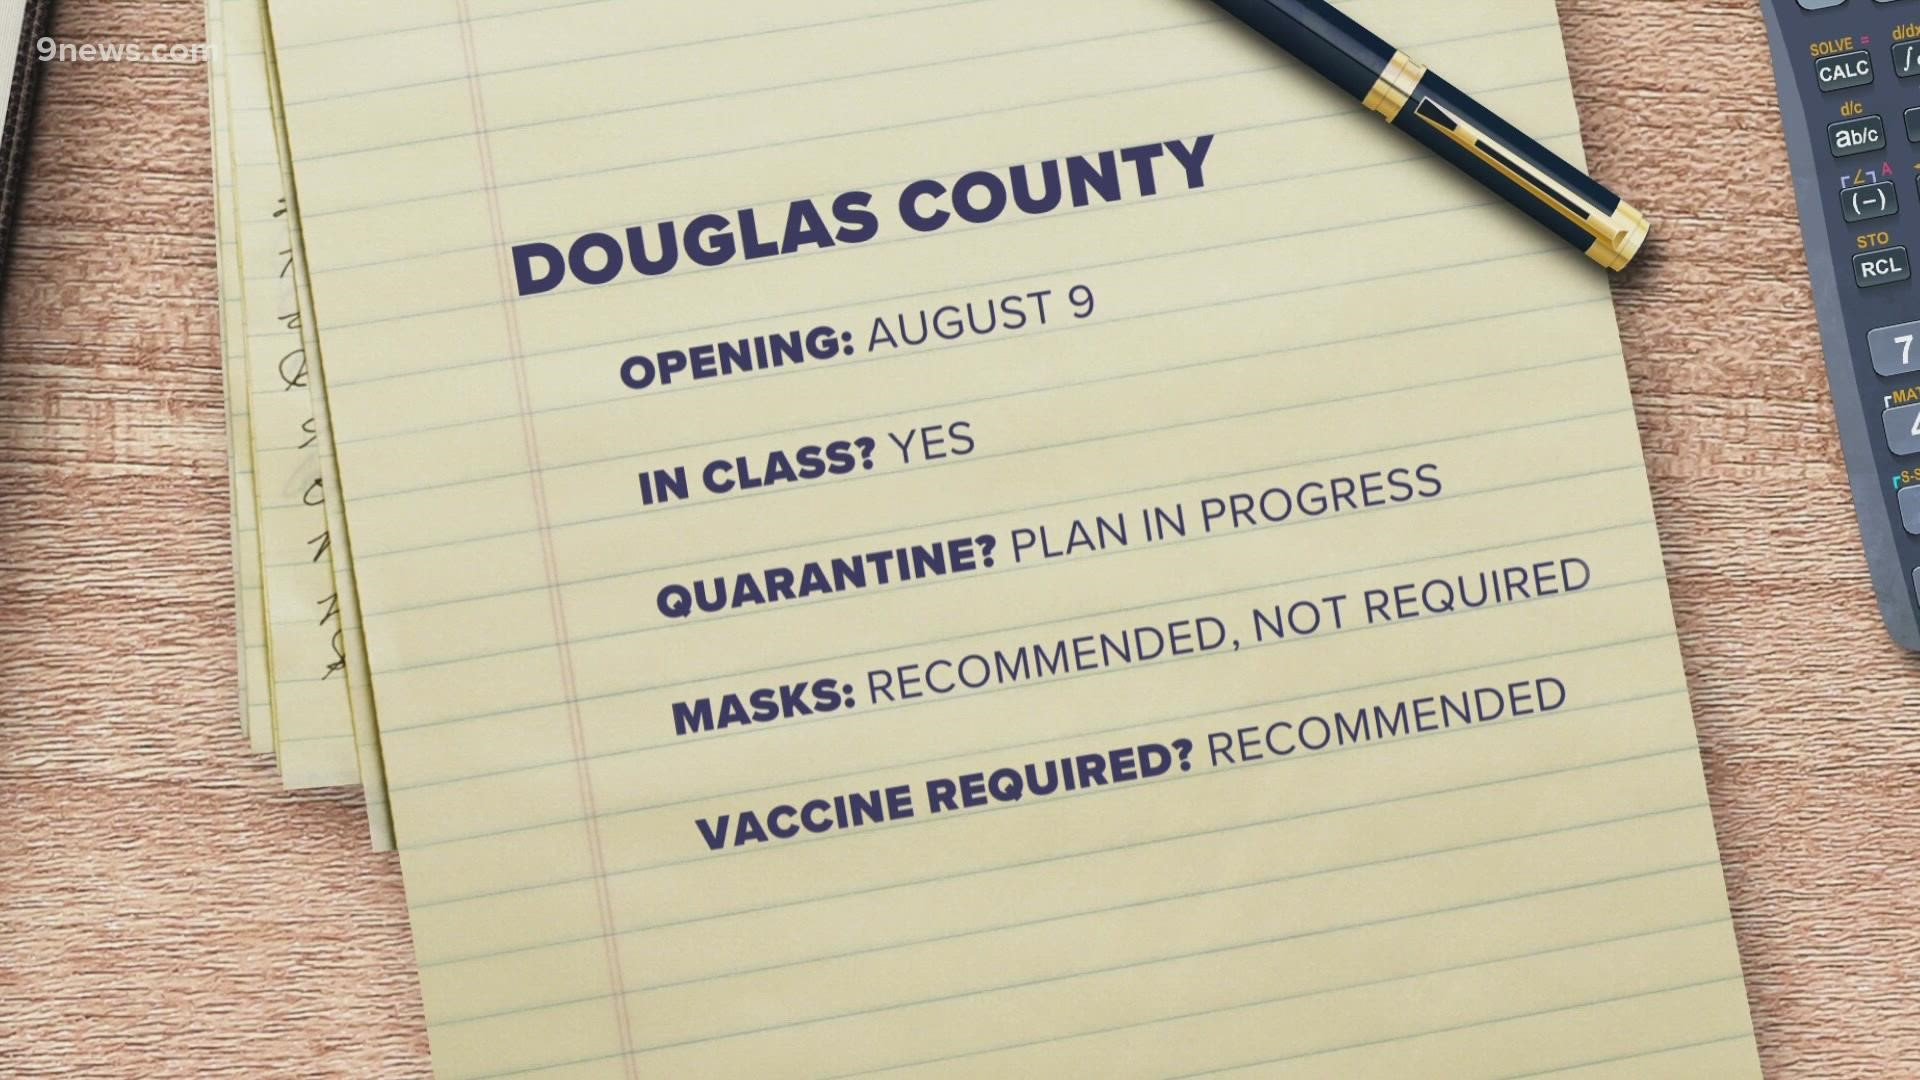 Some districts plan to require masks for everyone regardless of vaccination status. However, they're just recommended in other places.